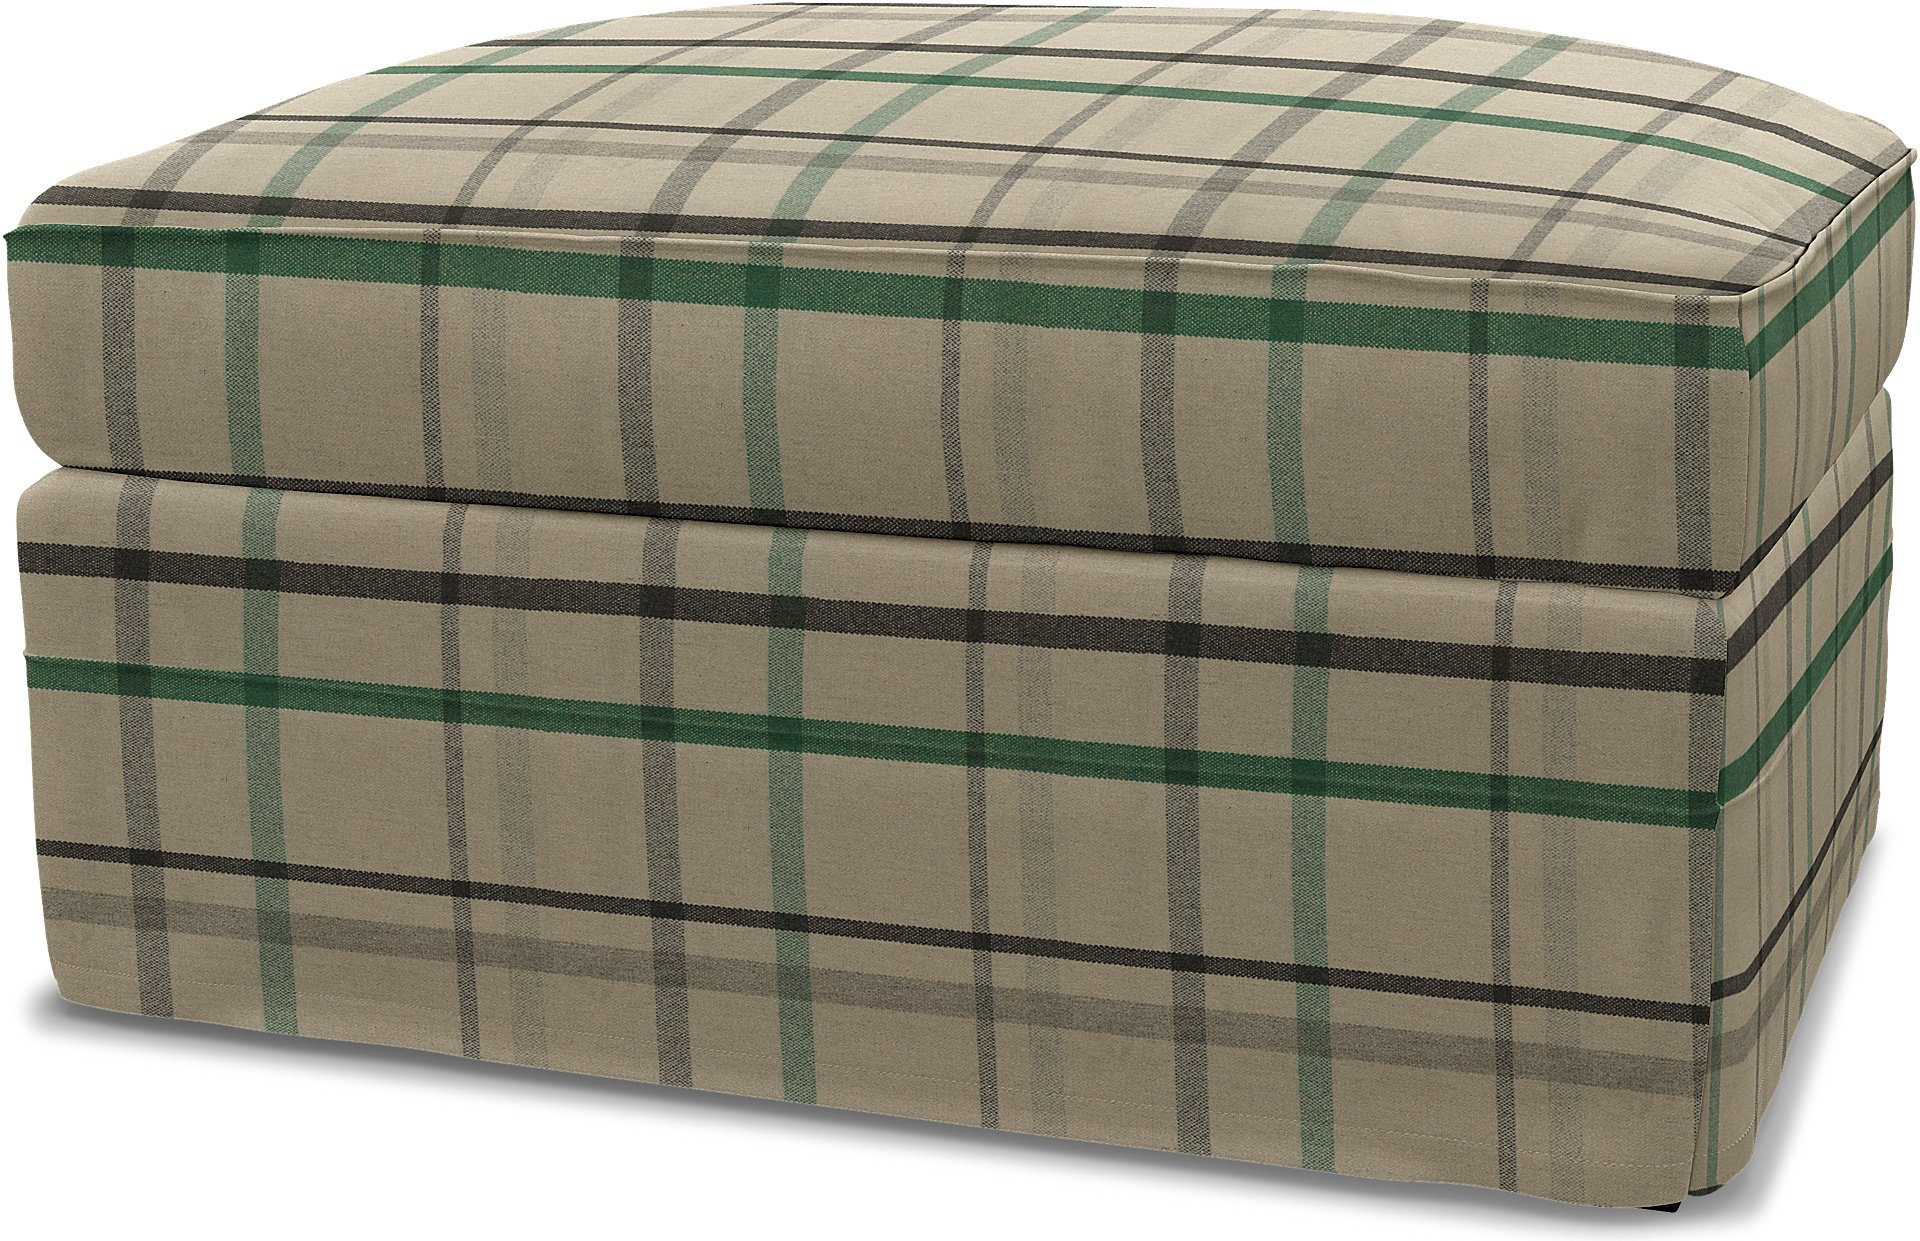 IKEA - Gronlid Footstool with Storage Cover, Forest Glade, Wool - Bemz